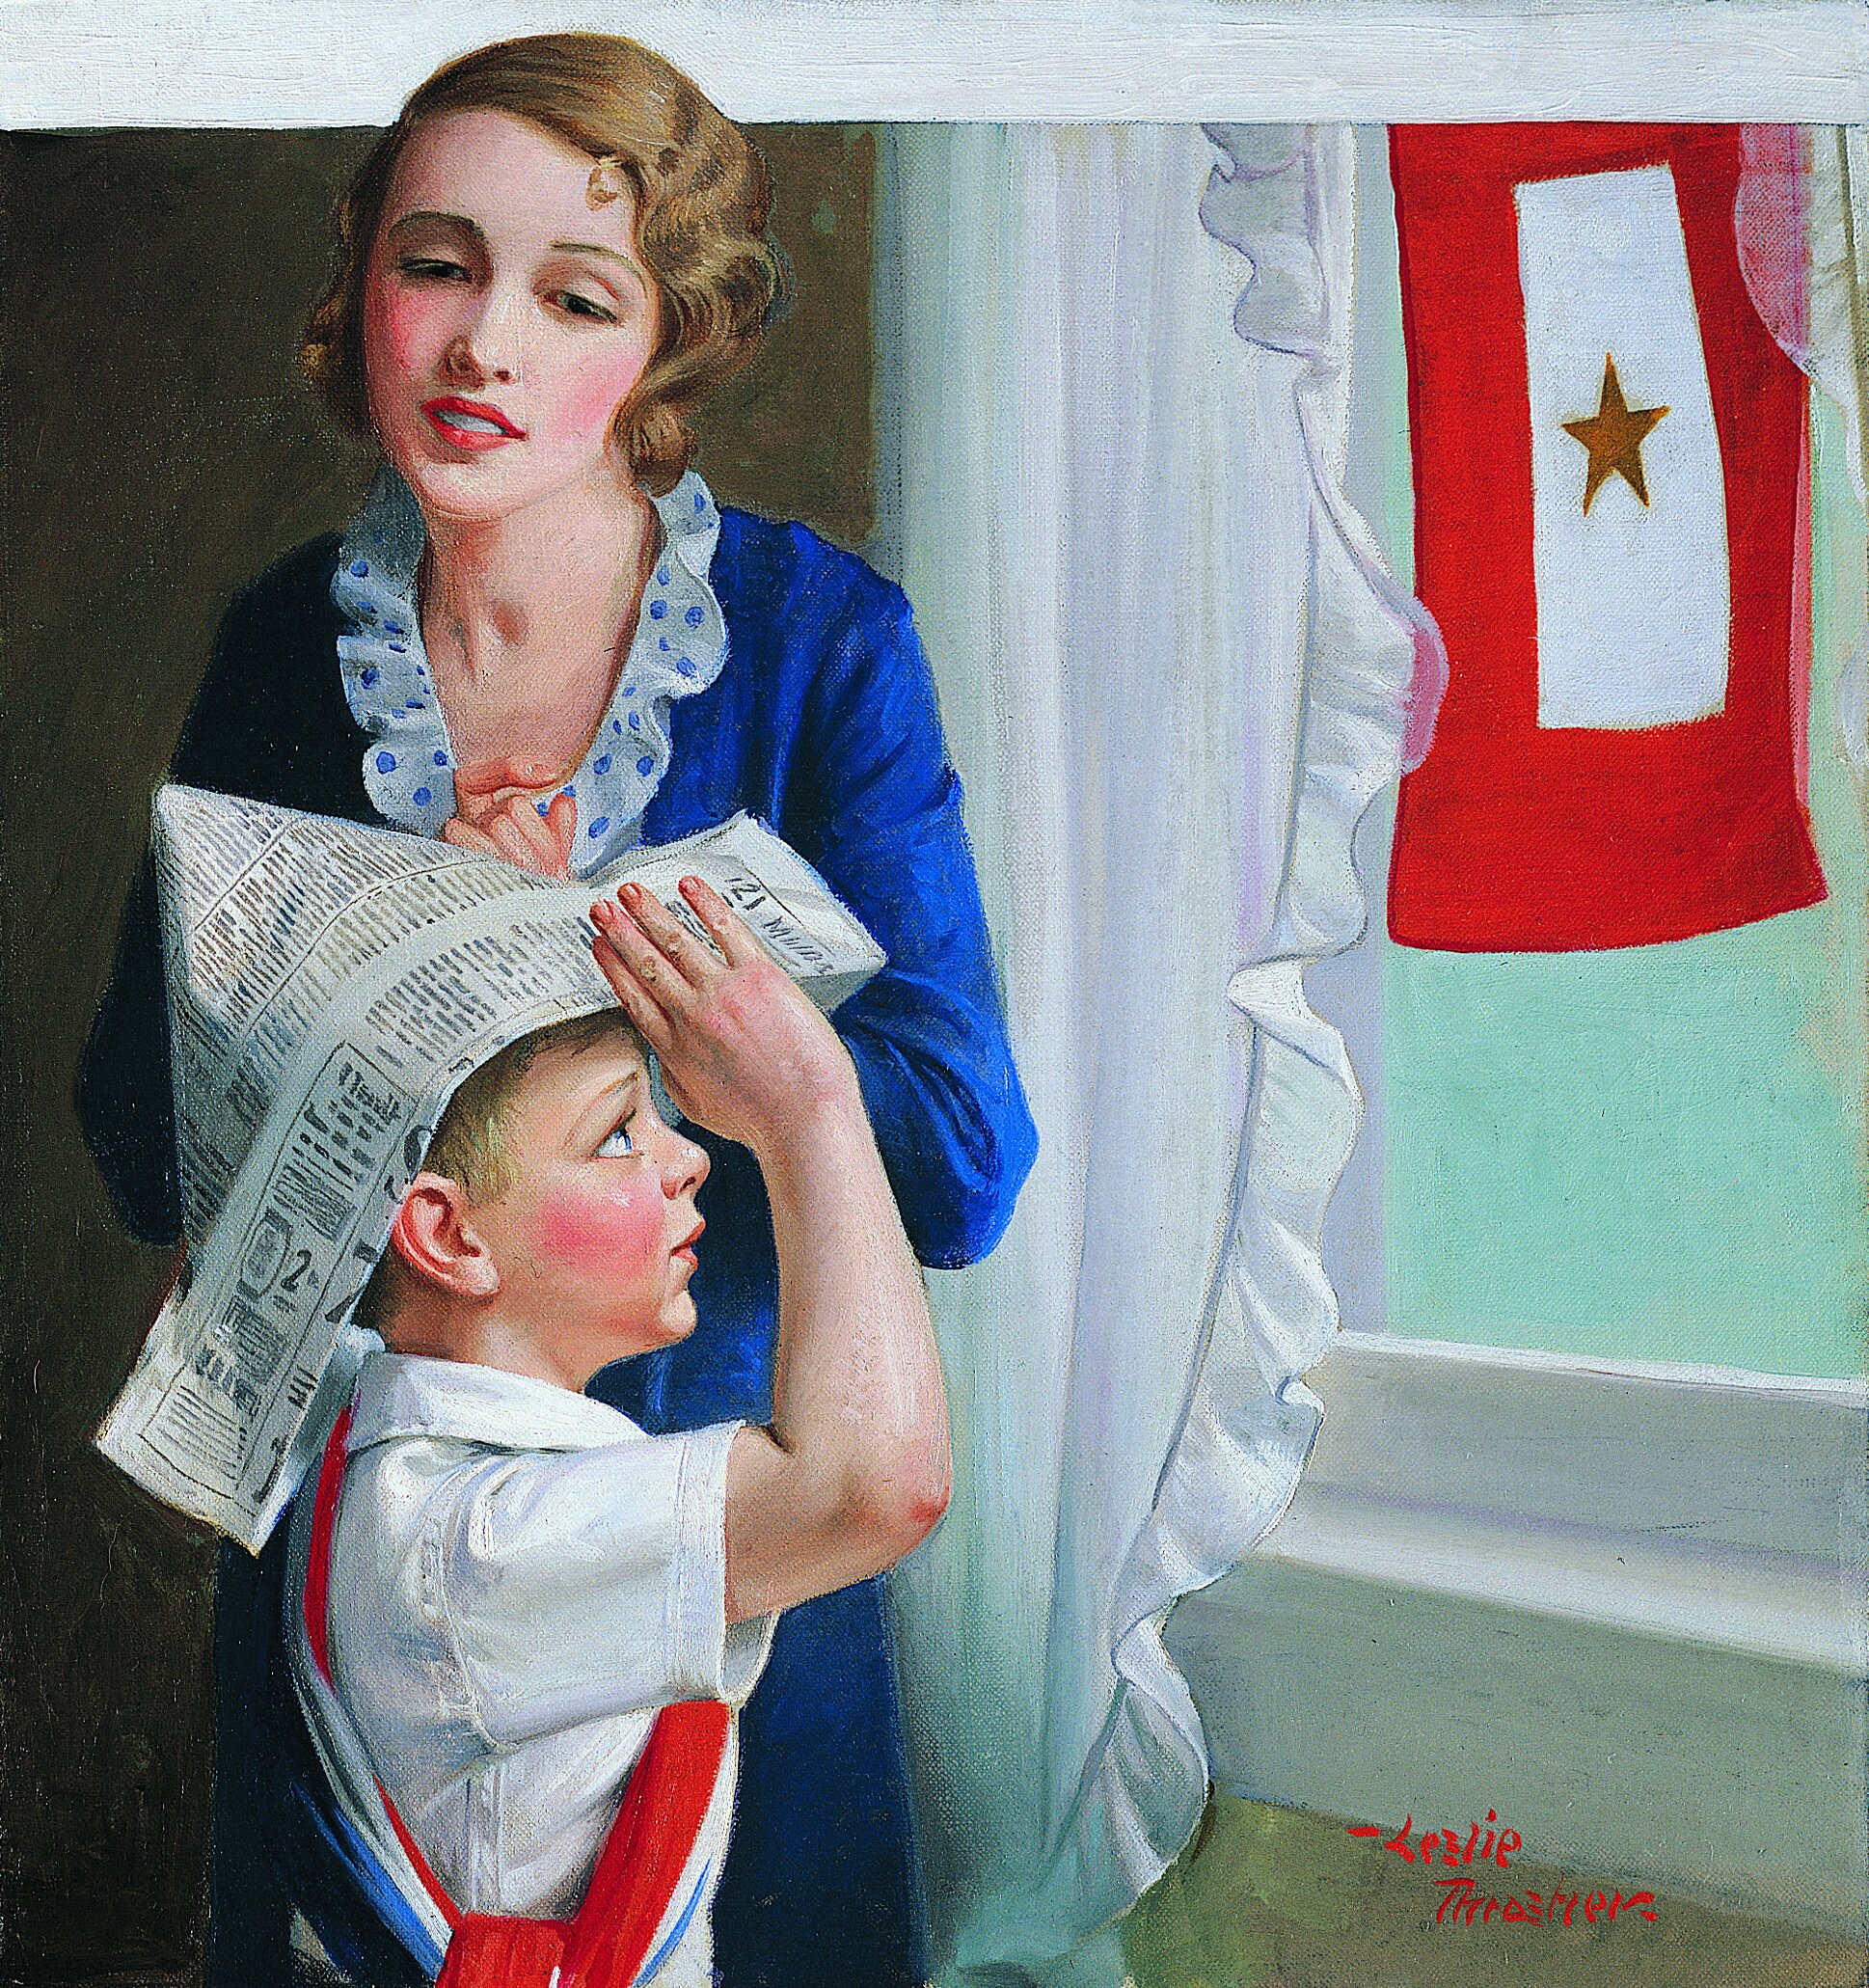   Leslie Thrasher (1889-1936)   The Patriot  1931, oil on canvas 18” x 16”, signed lower right  Liberty Magazine,  July 4, 1931 cover 